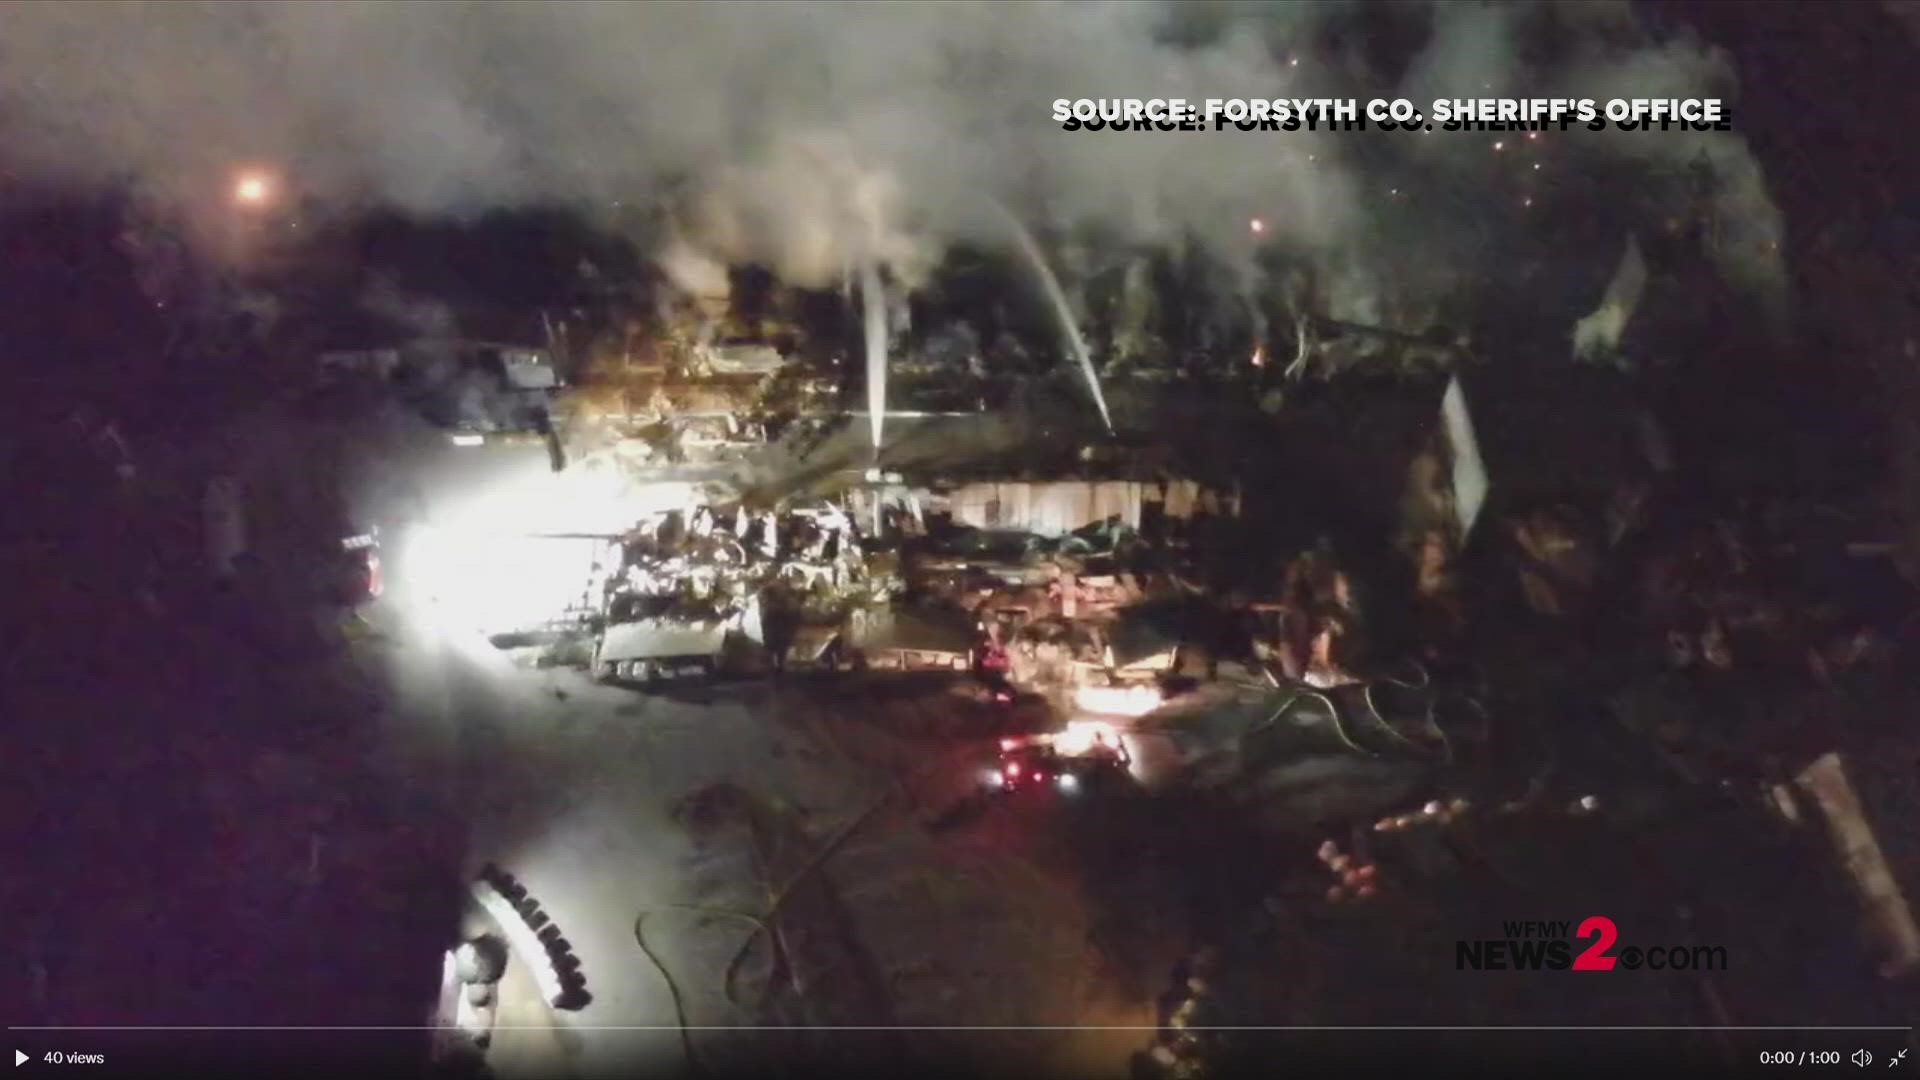 Drone video from the Forsyth County Sheriff's Office shows firefighters spraying water on the Weaver plant fire in Winston-Salem Thursday night.